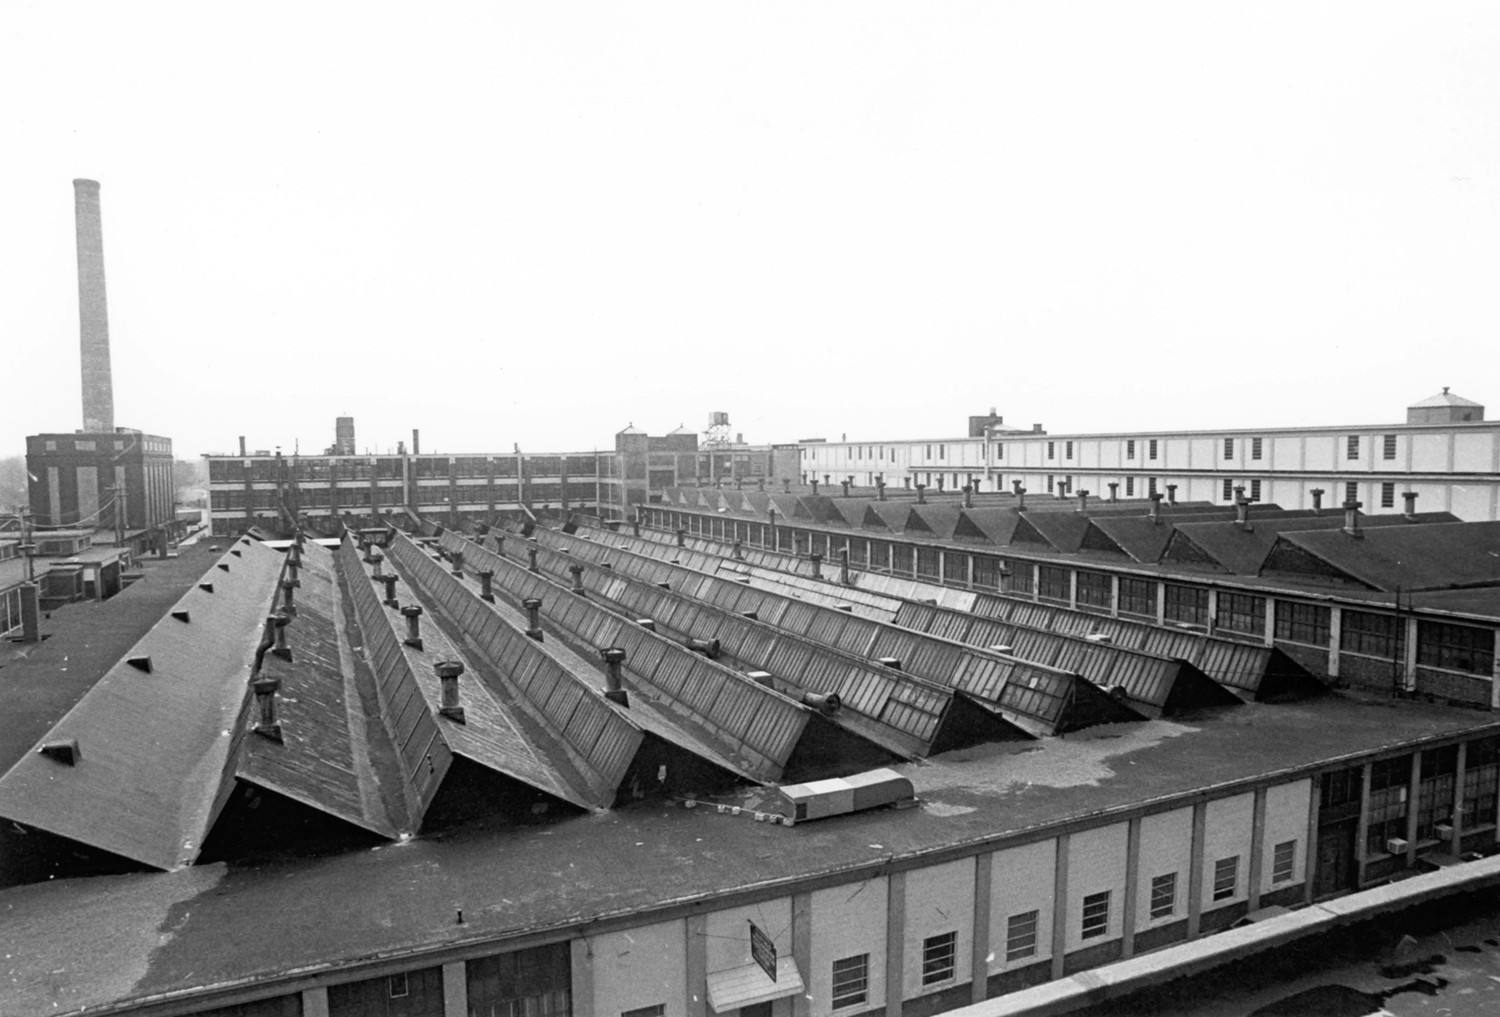 Pierce Arrow Factory Complex, Buffalo New York View of sawtooth roofs of Manufacturing Building (foreground) and the Assembly Building (to the right) as seen looking east over complex from the Administration Building (1974)